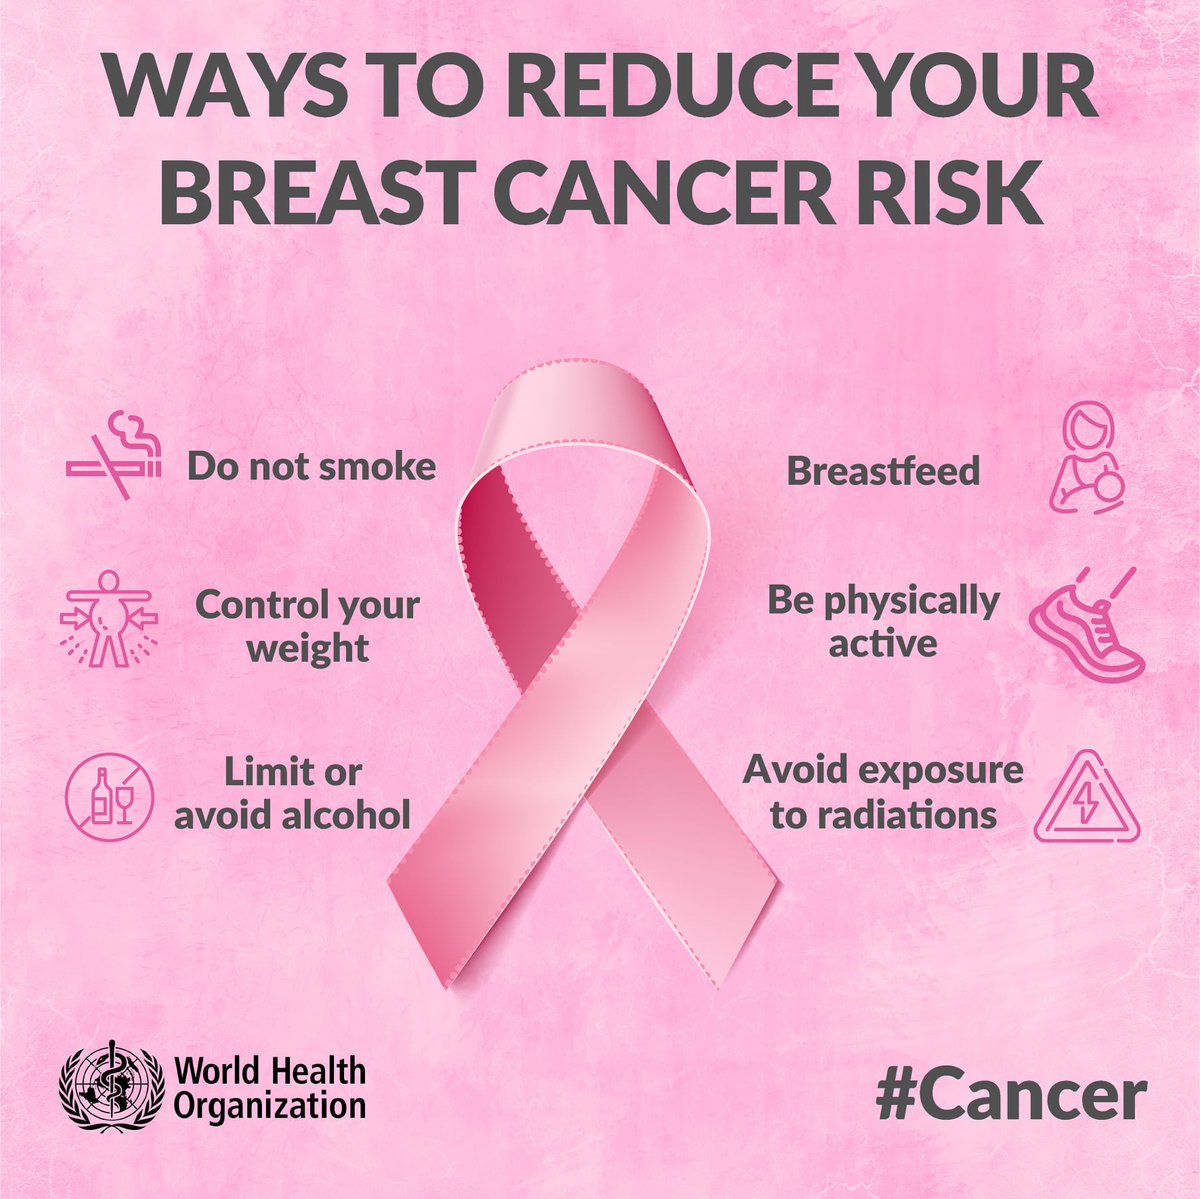 This is how you can prevent breast cancer: ➡️ Don't smoke ➡️Control your weight ➡️Limit or avoid alcohol ➡️Breastfeed ➡️Be physically active ➡️Avoid exposure to radiation And remember: Timely diagnosis saves lives #MyHealthMyRight